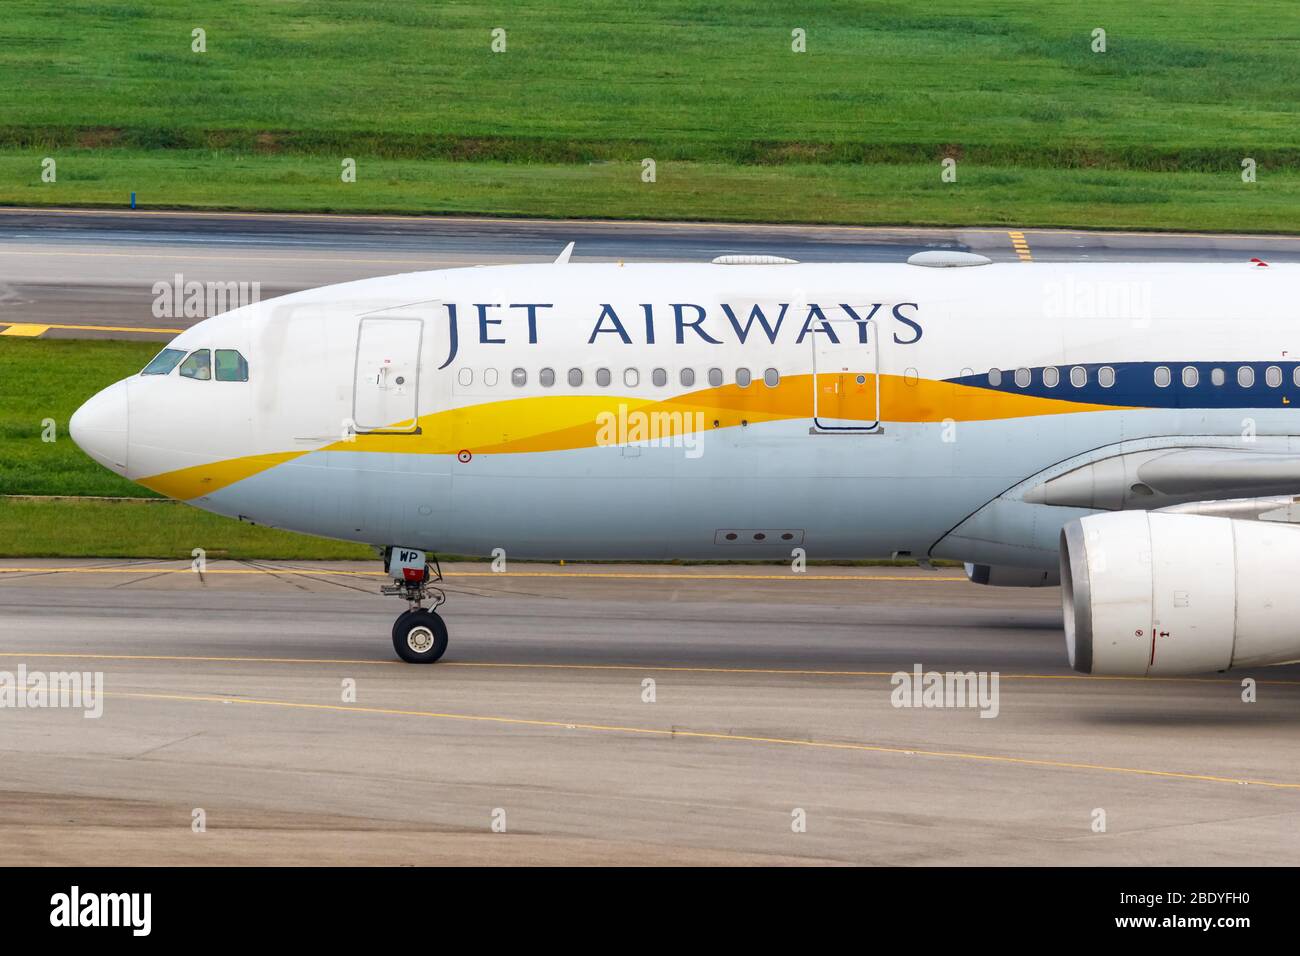 Changi, Singapore – January 29, 2018: Jet Airways Airbus A330-200 airplane at Changi airport (SIN) in Singapore. Airbus is a European aircraft manufac Stock Photo